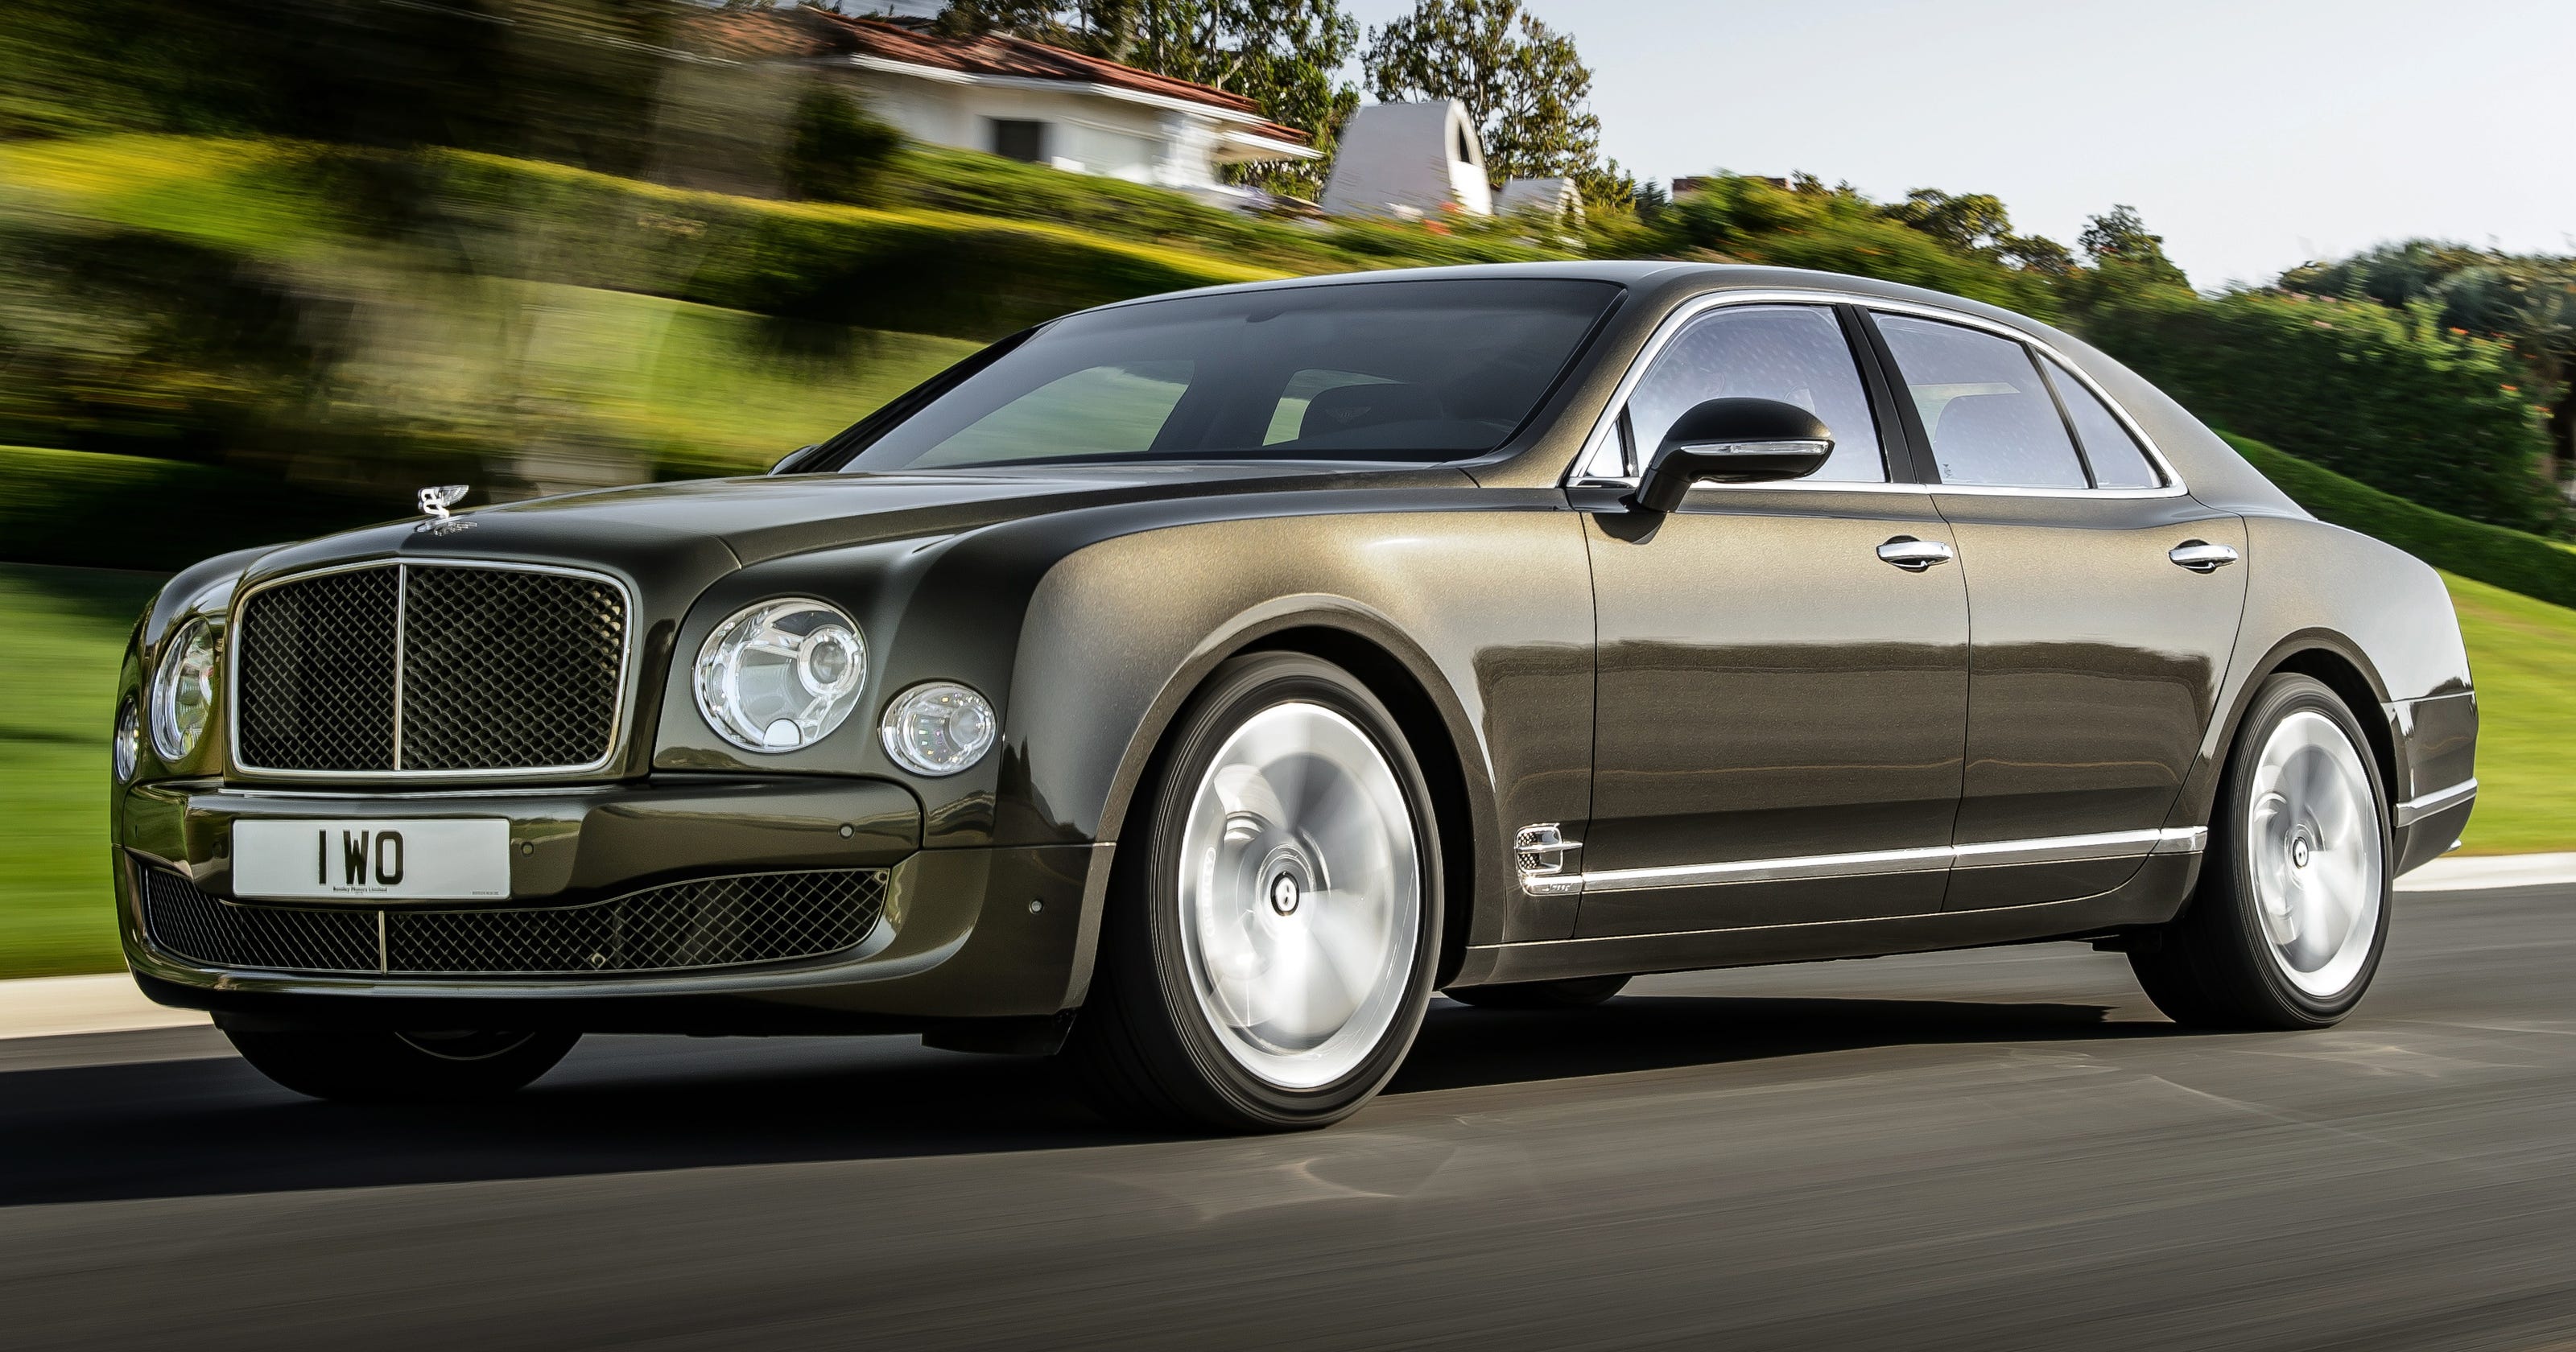 New Bentley flagship for the 1 of the 1